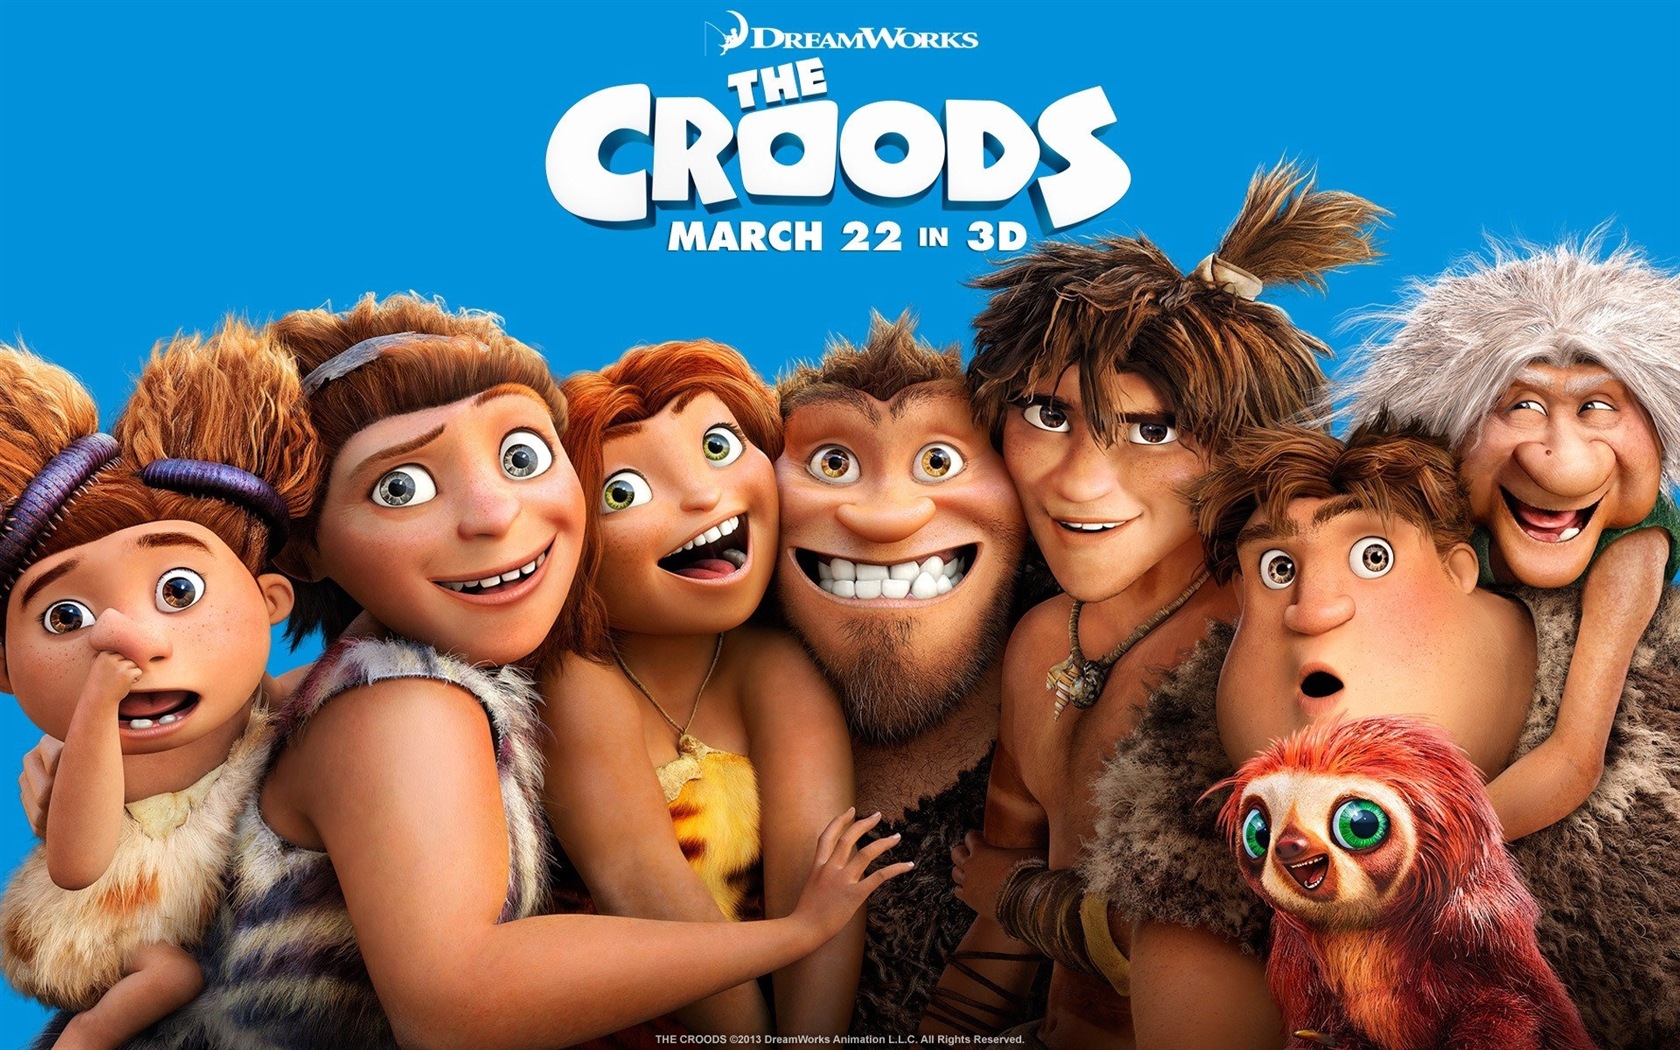 The Croods HD movie wallpapers #3 - 1680x1050